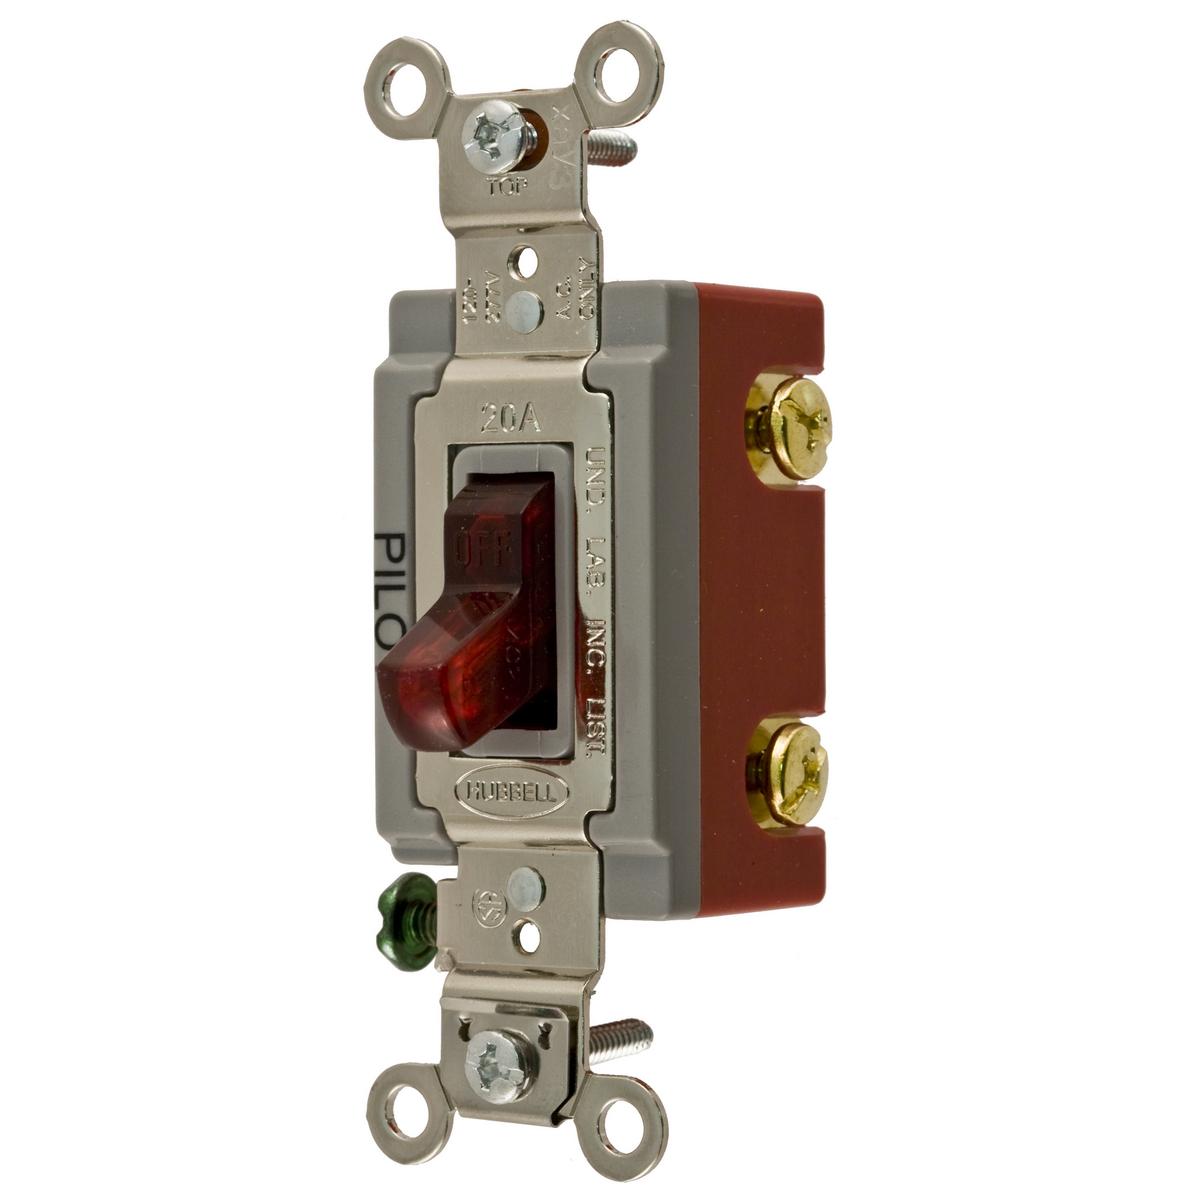 Hubbell HBL1221PL Switches and Lighting Controls, Industrial Grade, Pilot Light Toggle Switches, General Purpose AC, Single Pole, 20A 120/277V AC, Back and Side Wired, Red Toggle  ; Large brass binding head screws with deep slots ; Abuse resistant nylon toggle ; Strip gaug